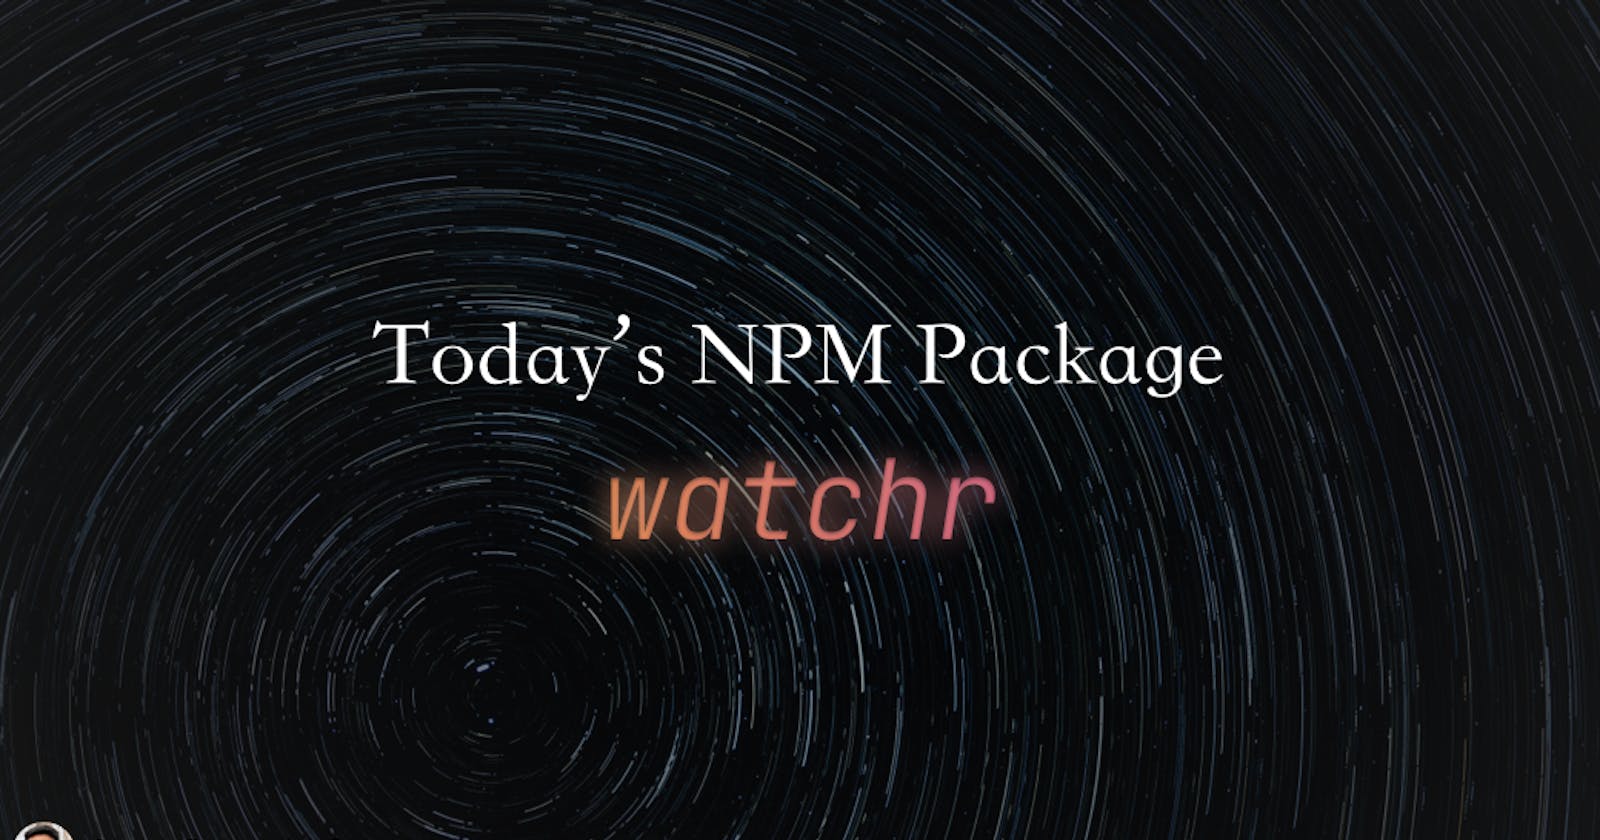 Today's npm package: watchr